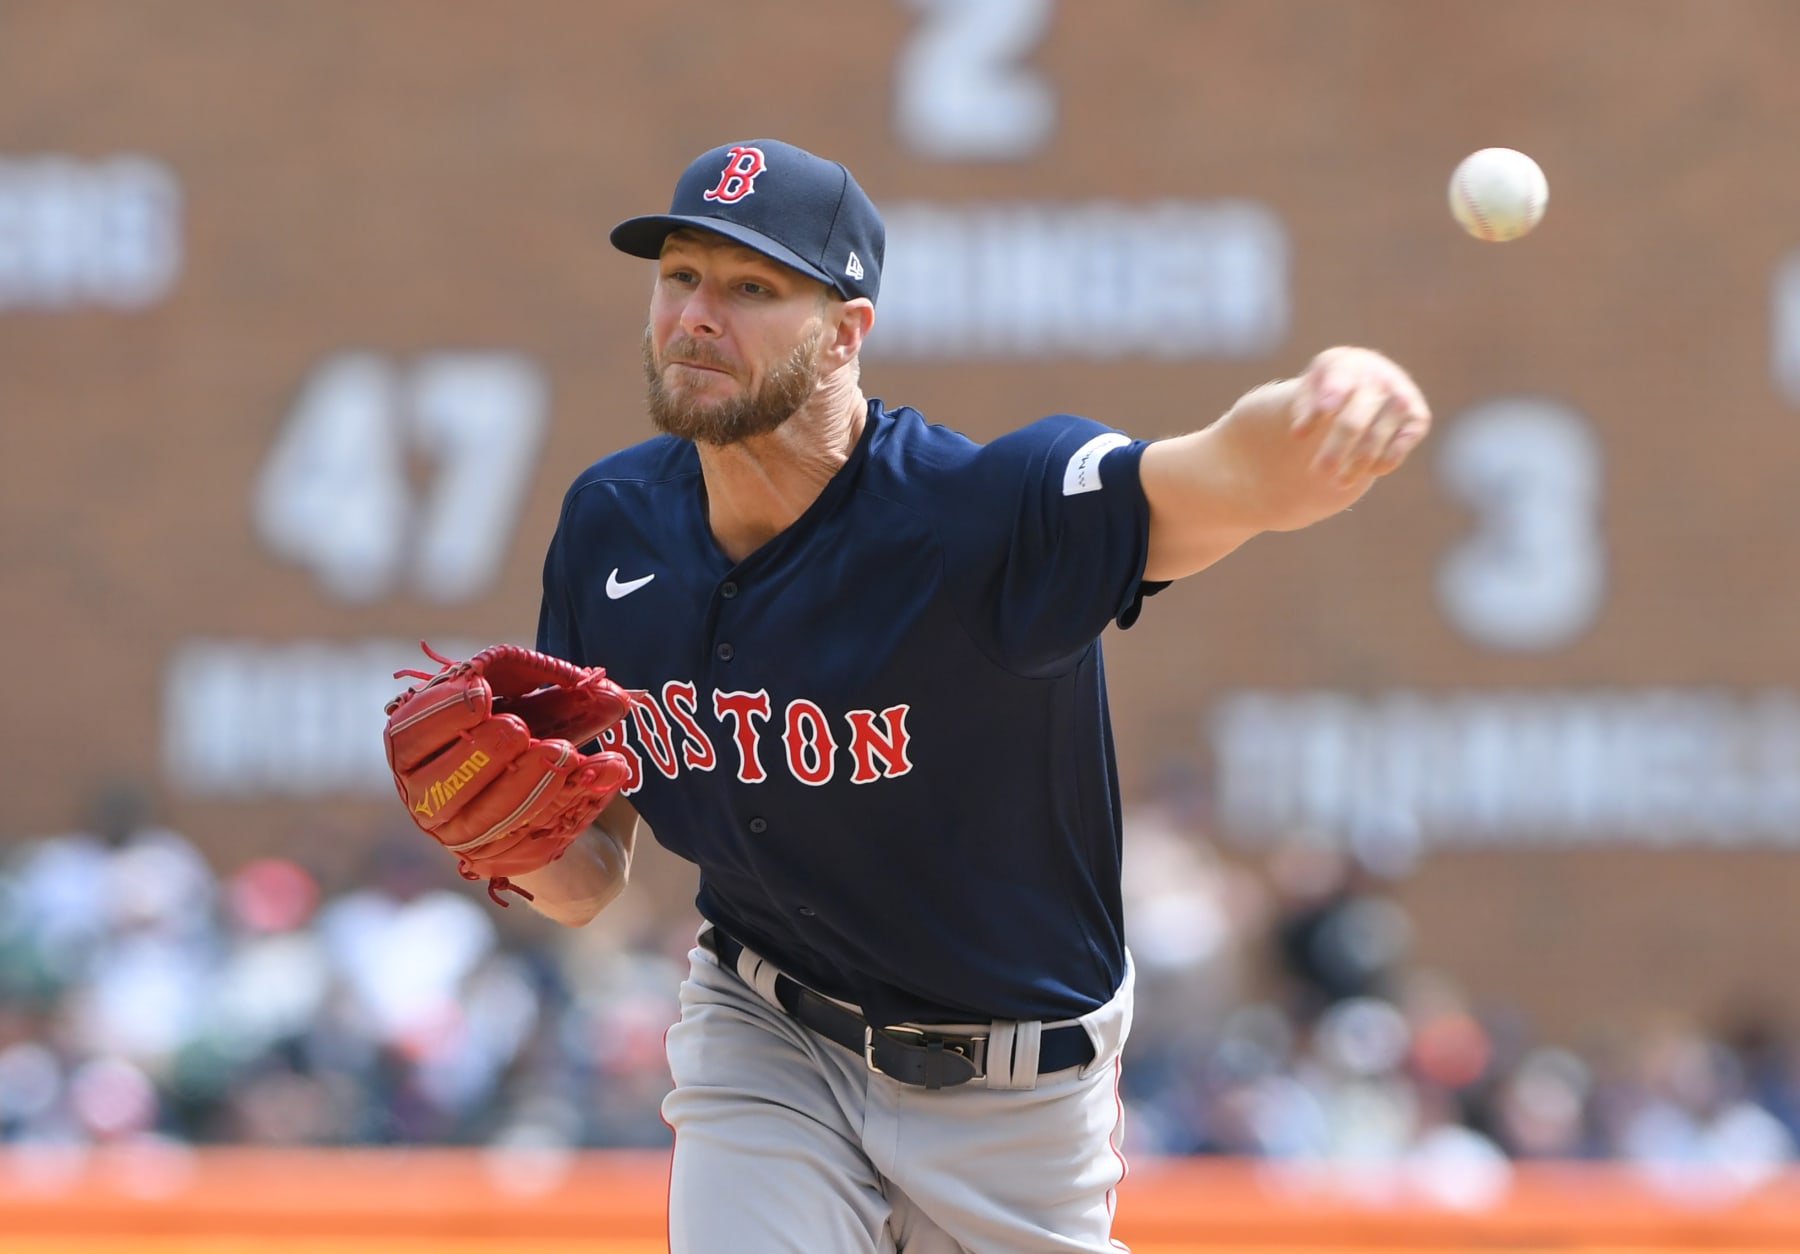 Red Sox place pitchers Houck, Crawford on restricted list ahead of